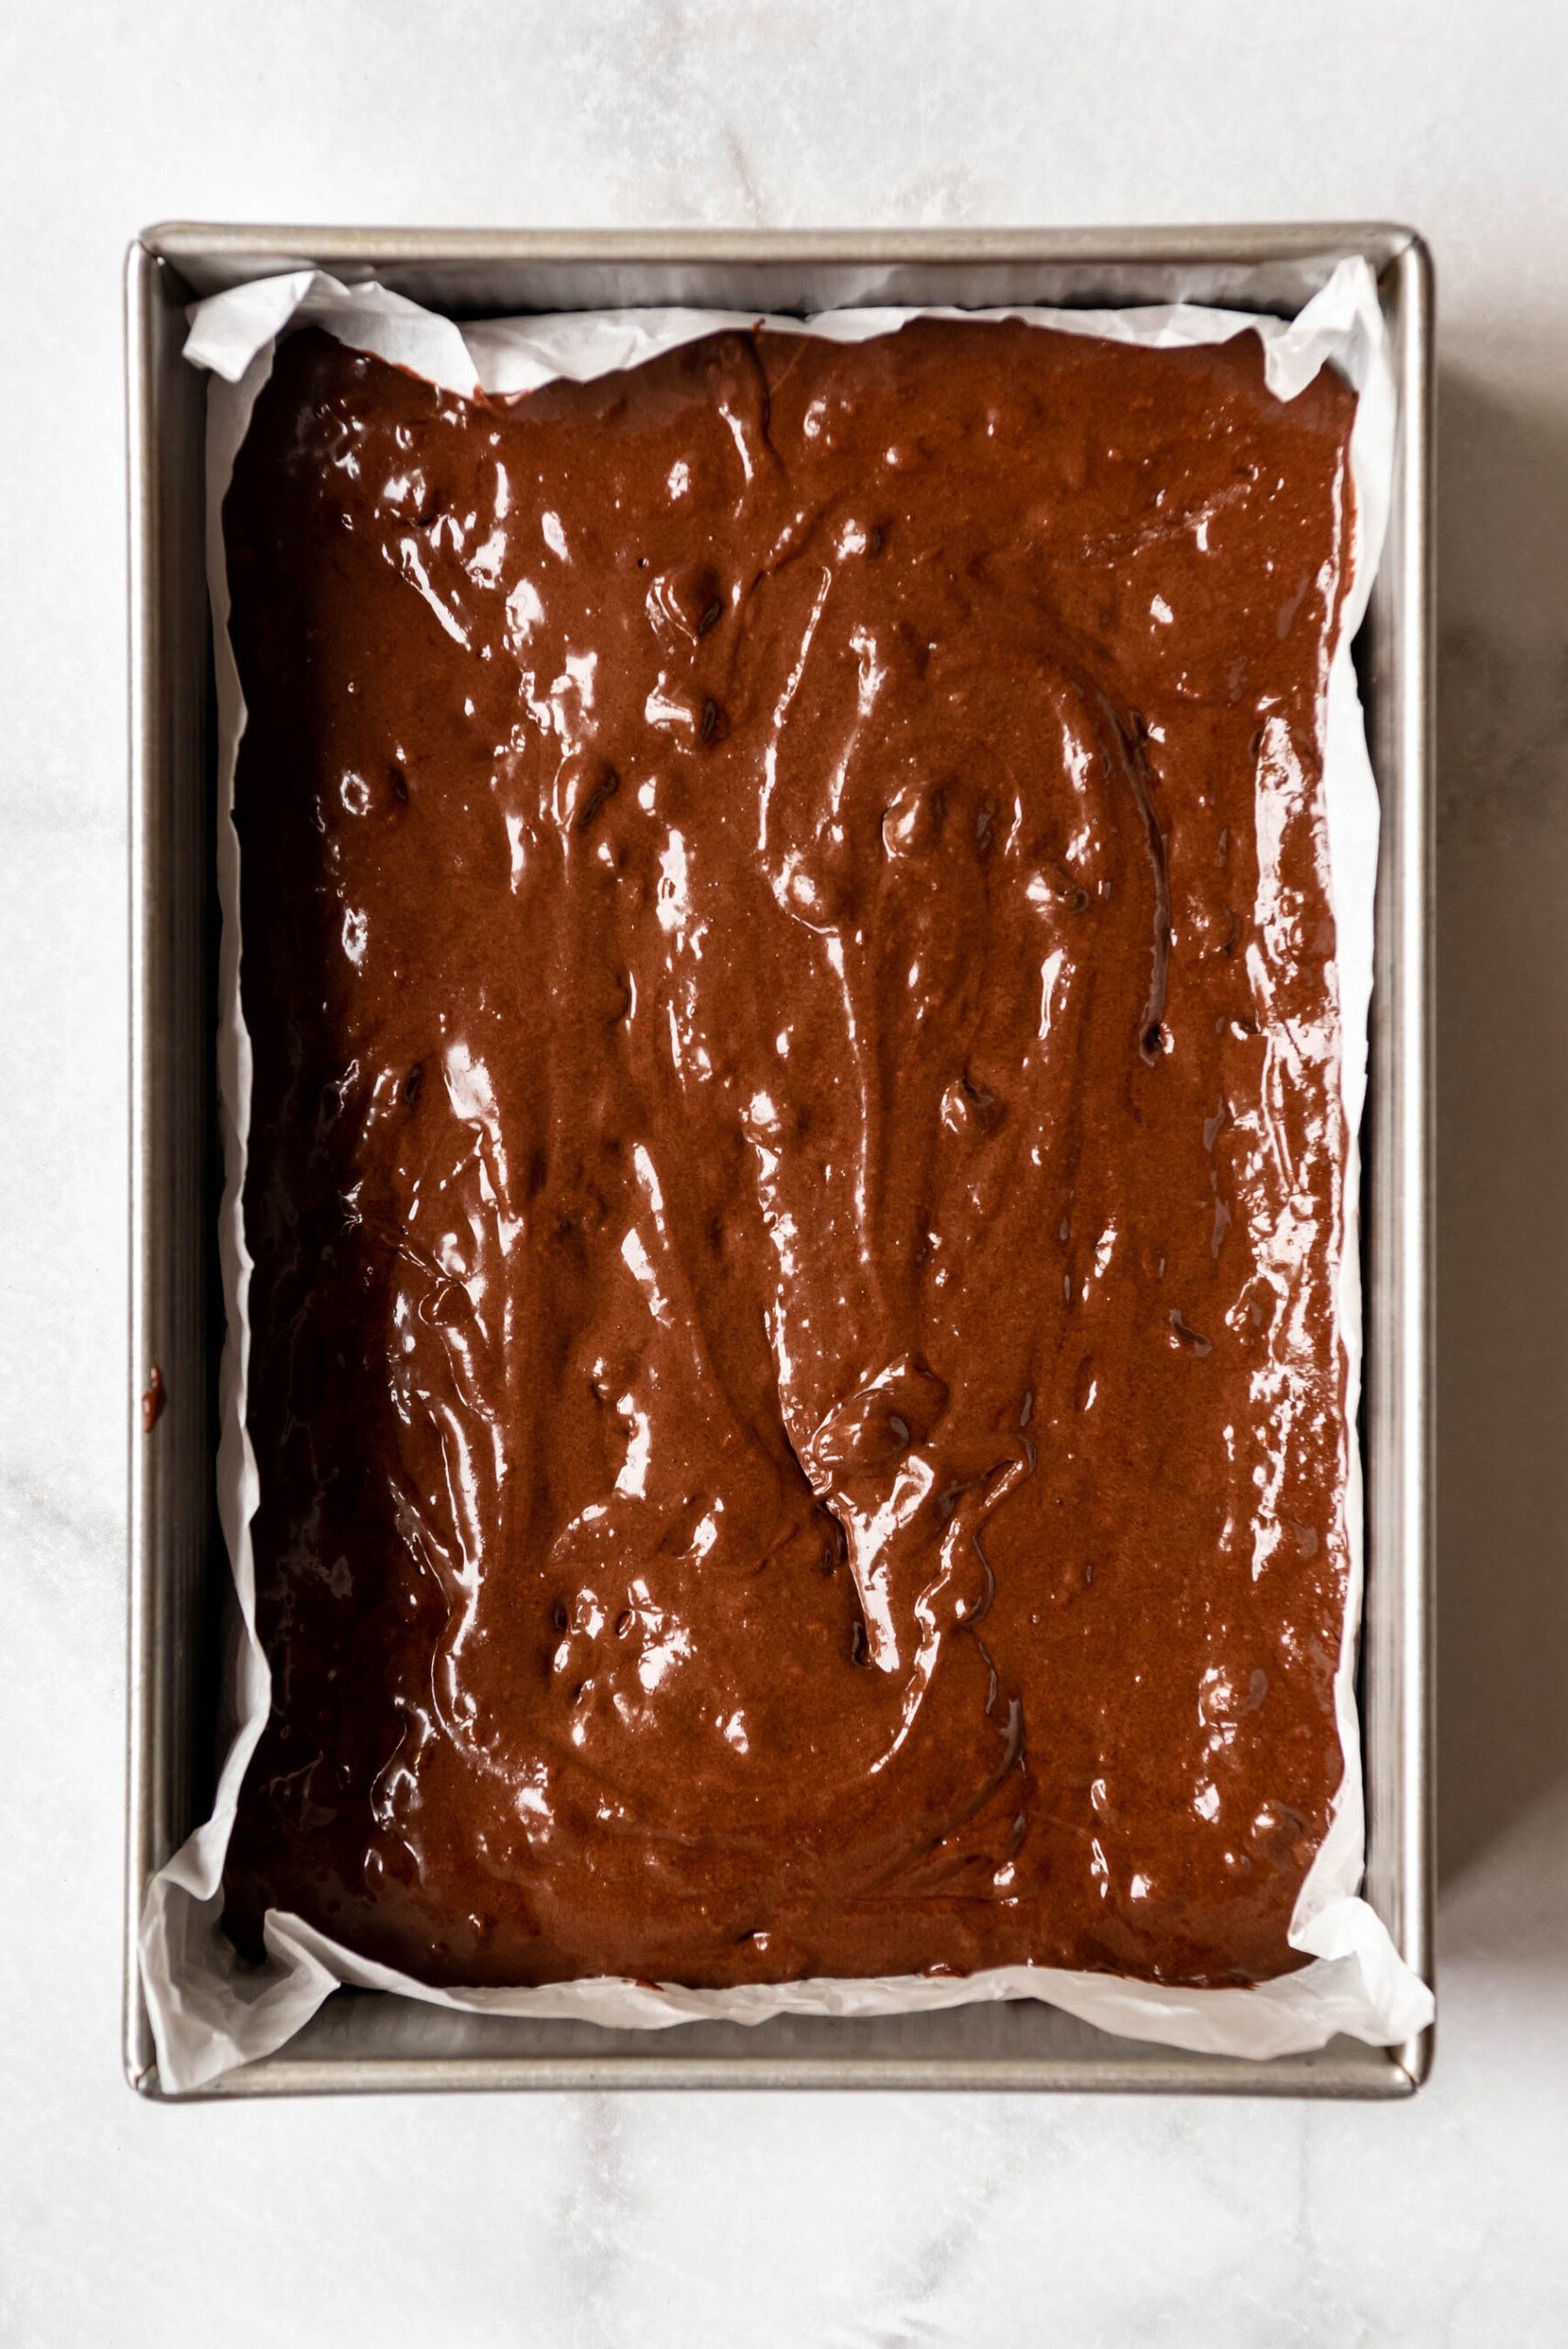 Brownie batter spread in a 9x13-inch baking dish.